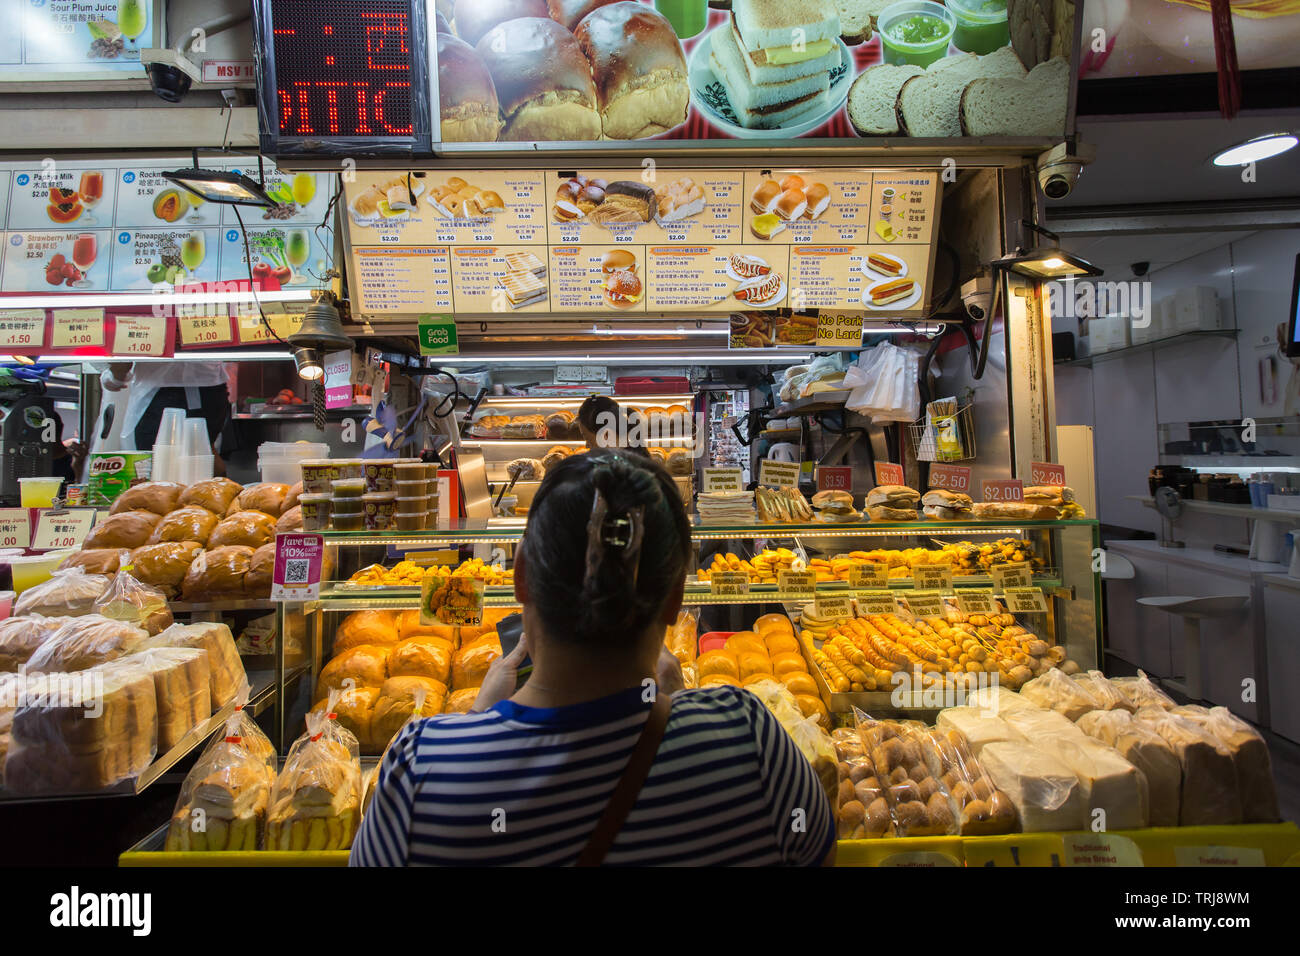 A lady in the middle is buying freshly prepared bread at Bugis street, Singapore. Stock Photo